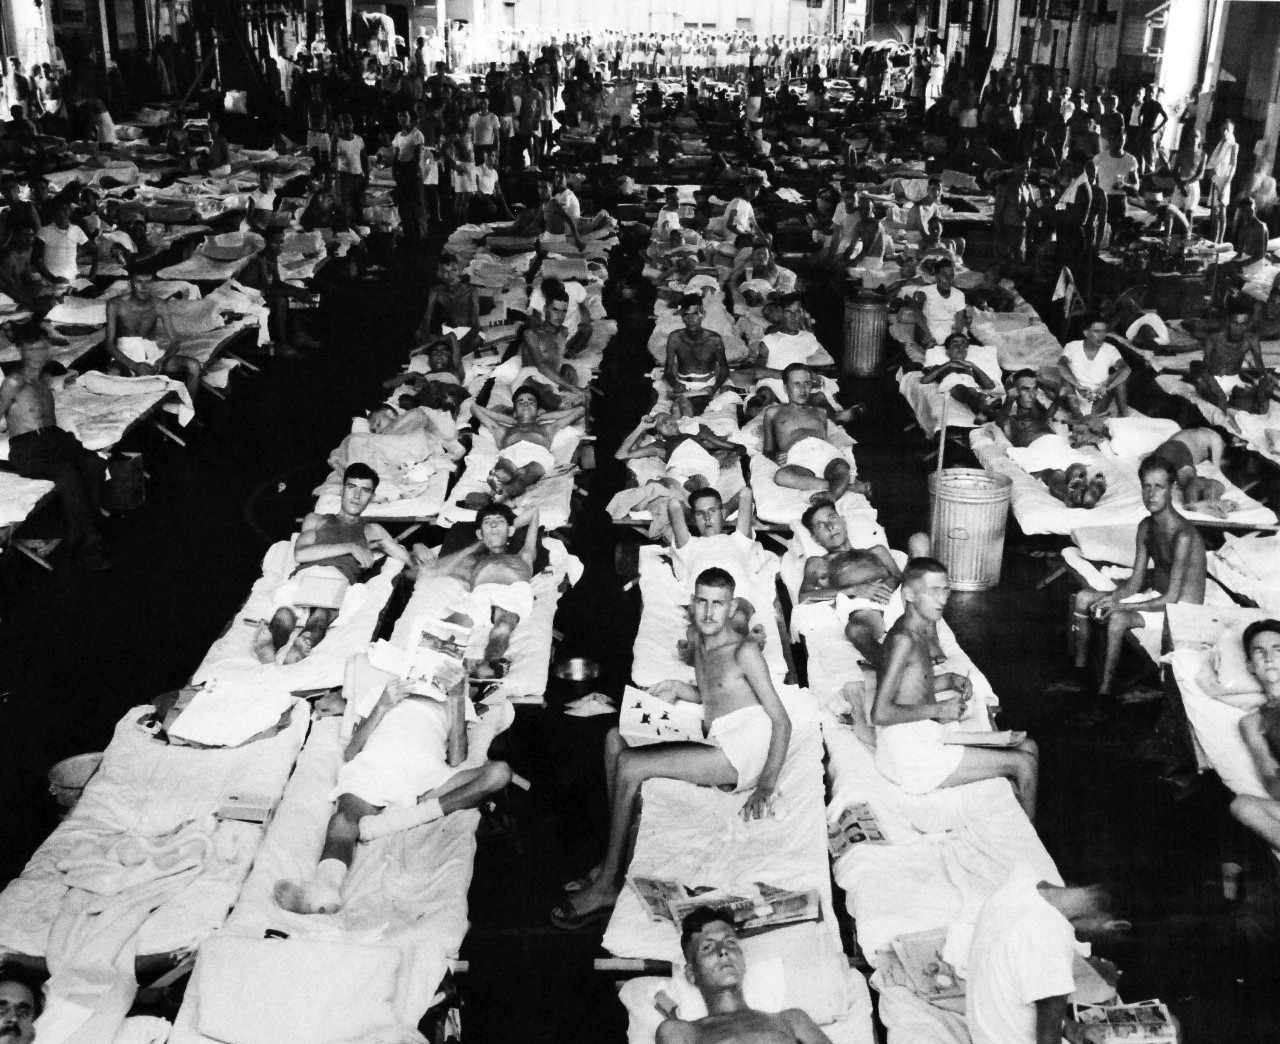 80-G-495664:   Allied Prisoners of War, Formosa, 1945.   Brought to liberty from under Japanese maltreatment on Formosa, before occupation forces appeared to take over the island.  These 474 British and American soldiers rest, eat and sleep on the hangar deck of USS Block Island (CVE-106).  Photograph released September 27, 1945.  Official U.S. Navy photograph, now in the collections of the National Archives.  (2014/05/29).    The original is a small photograph.   